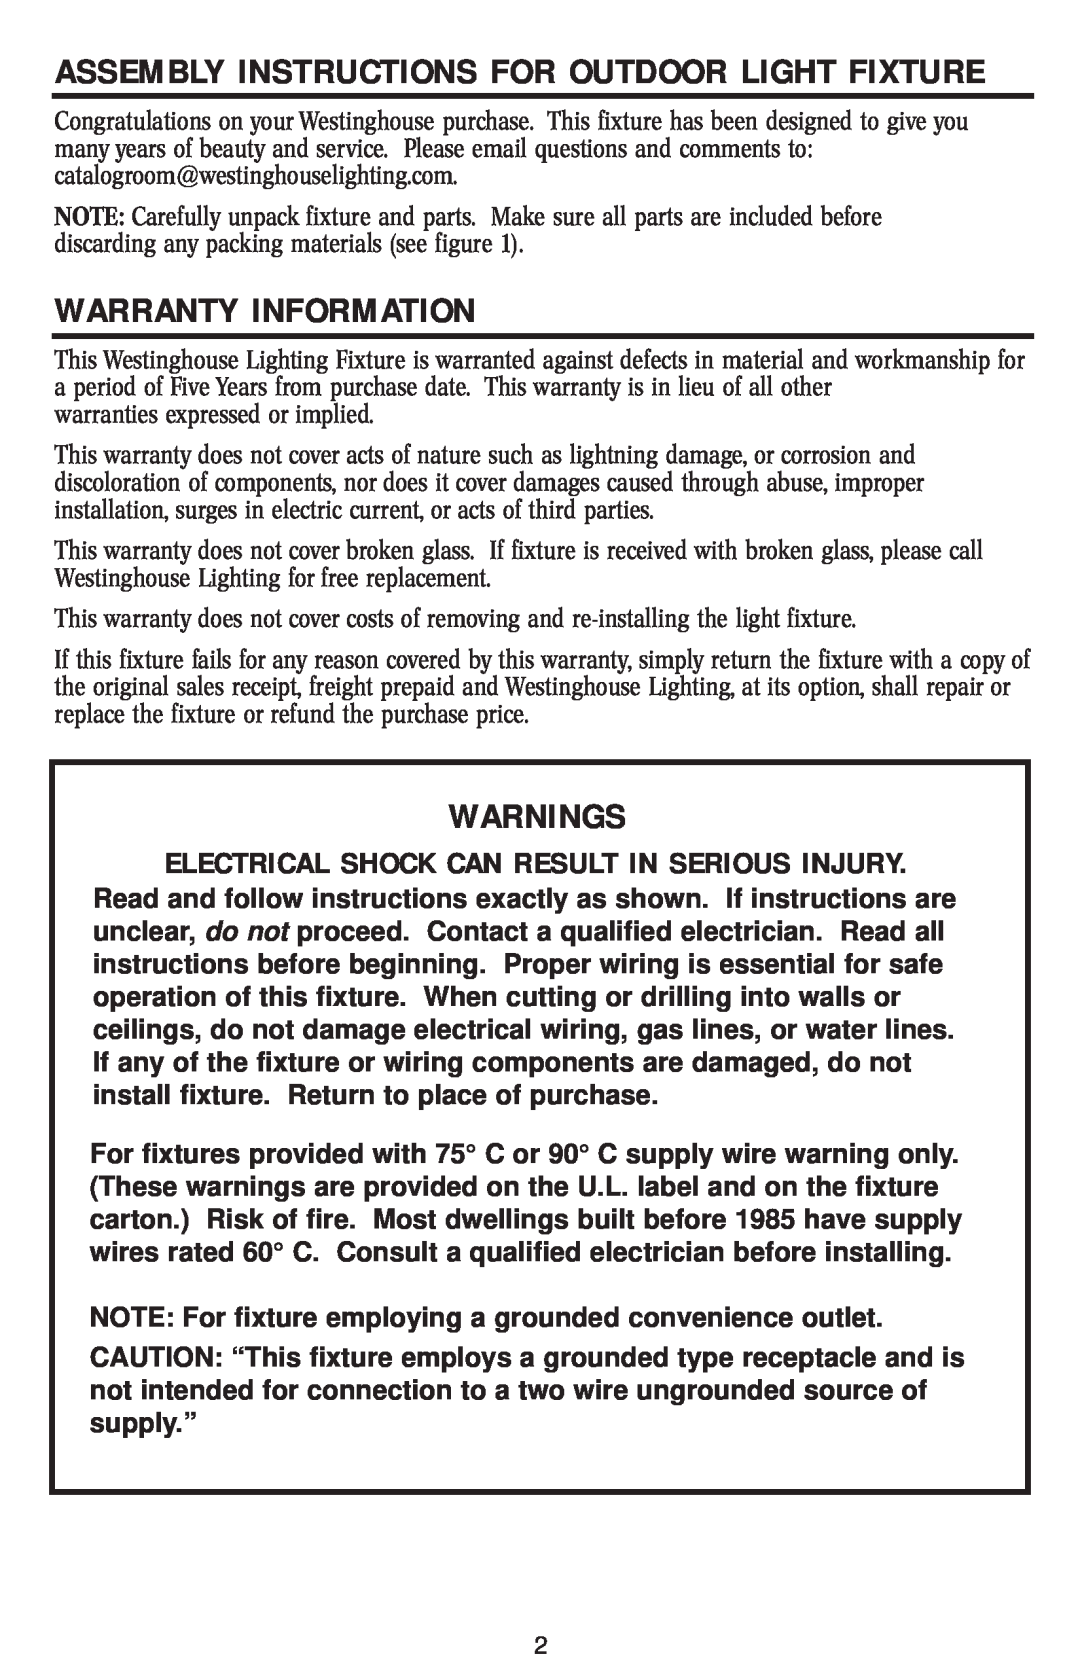 Westinghouse 11704 owner manual Warranty Information, Warnings, Assembly Instructions For Outdoor Light Fixture 